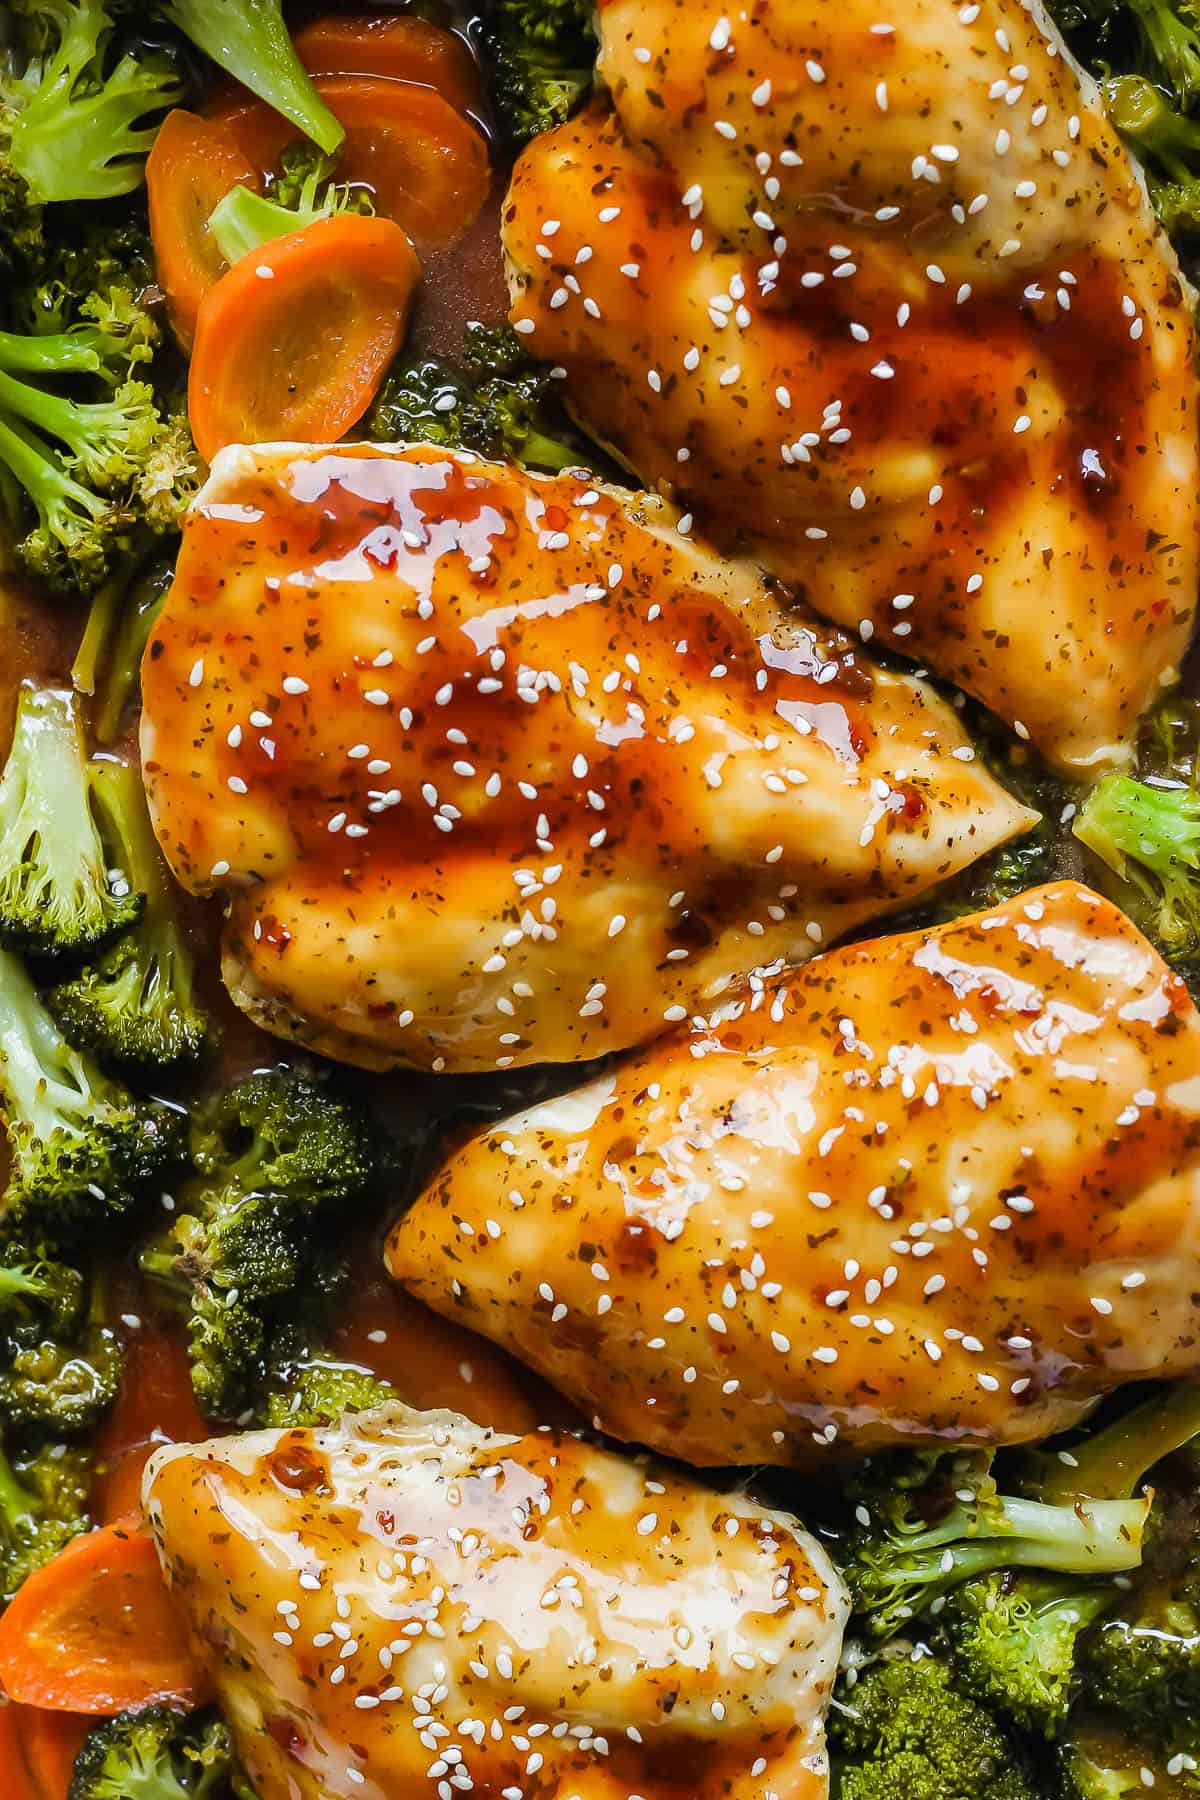 A close up of the baked teriyaki chicken.